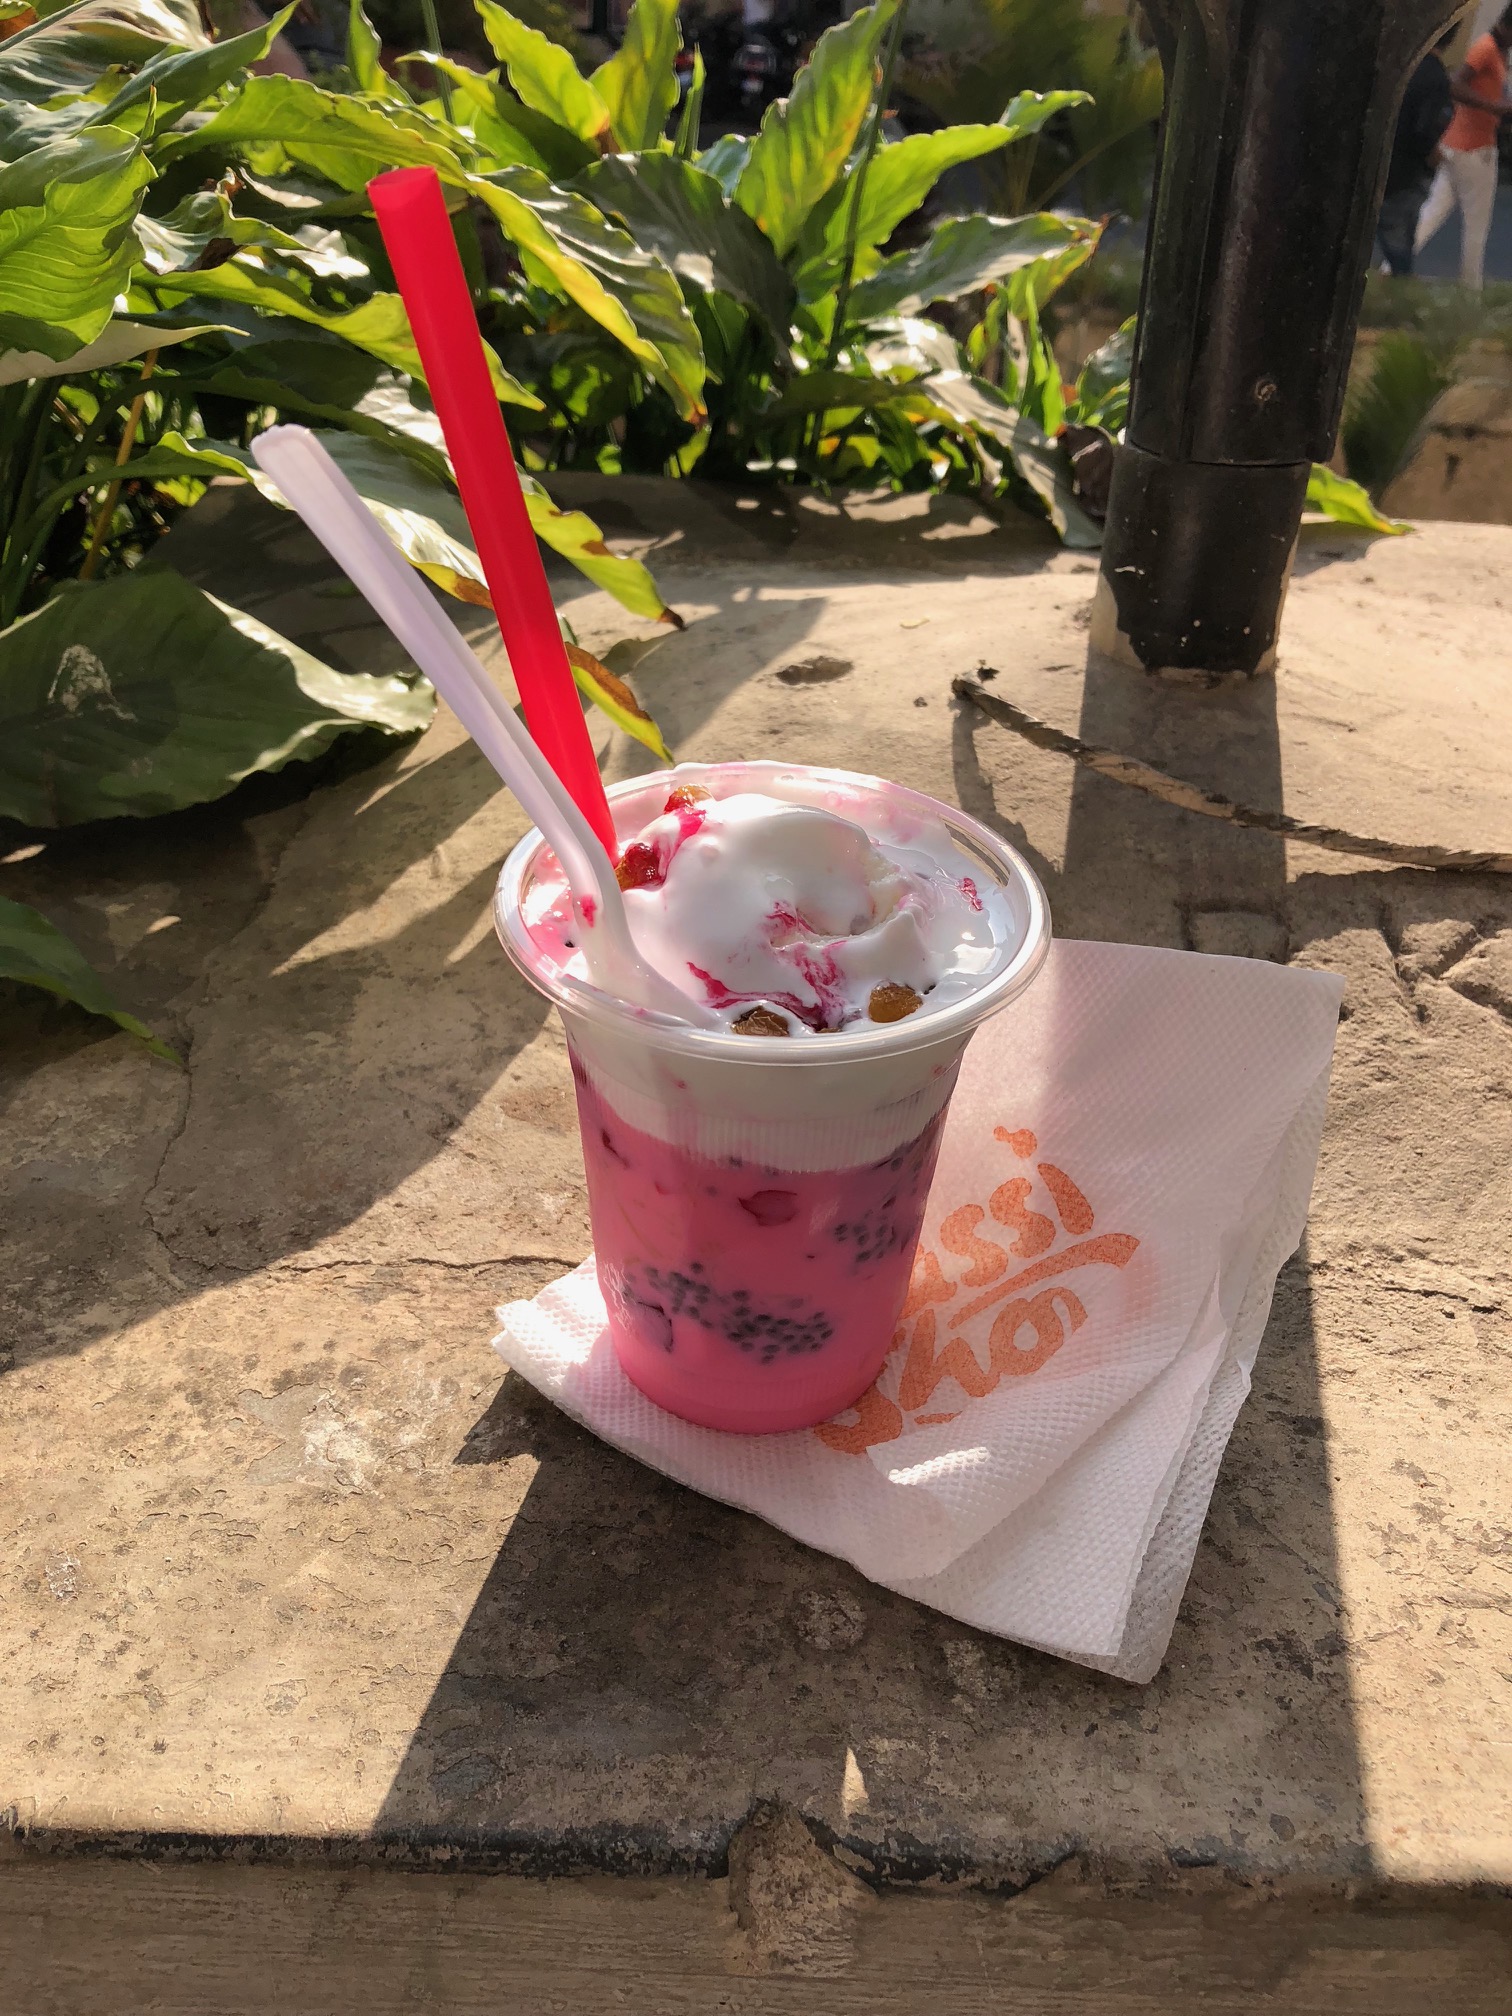 A straw and spoon stick out of a bright pink drink with ice cream on top.